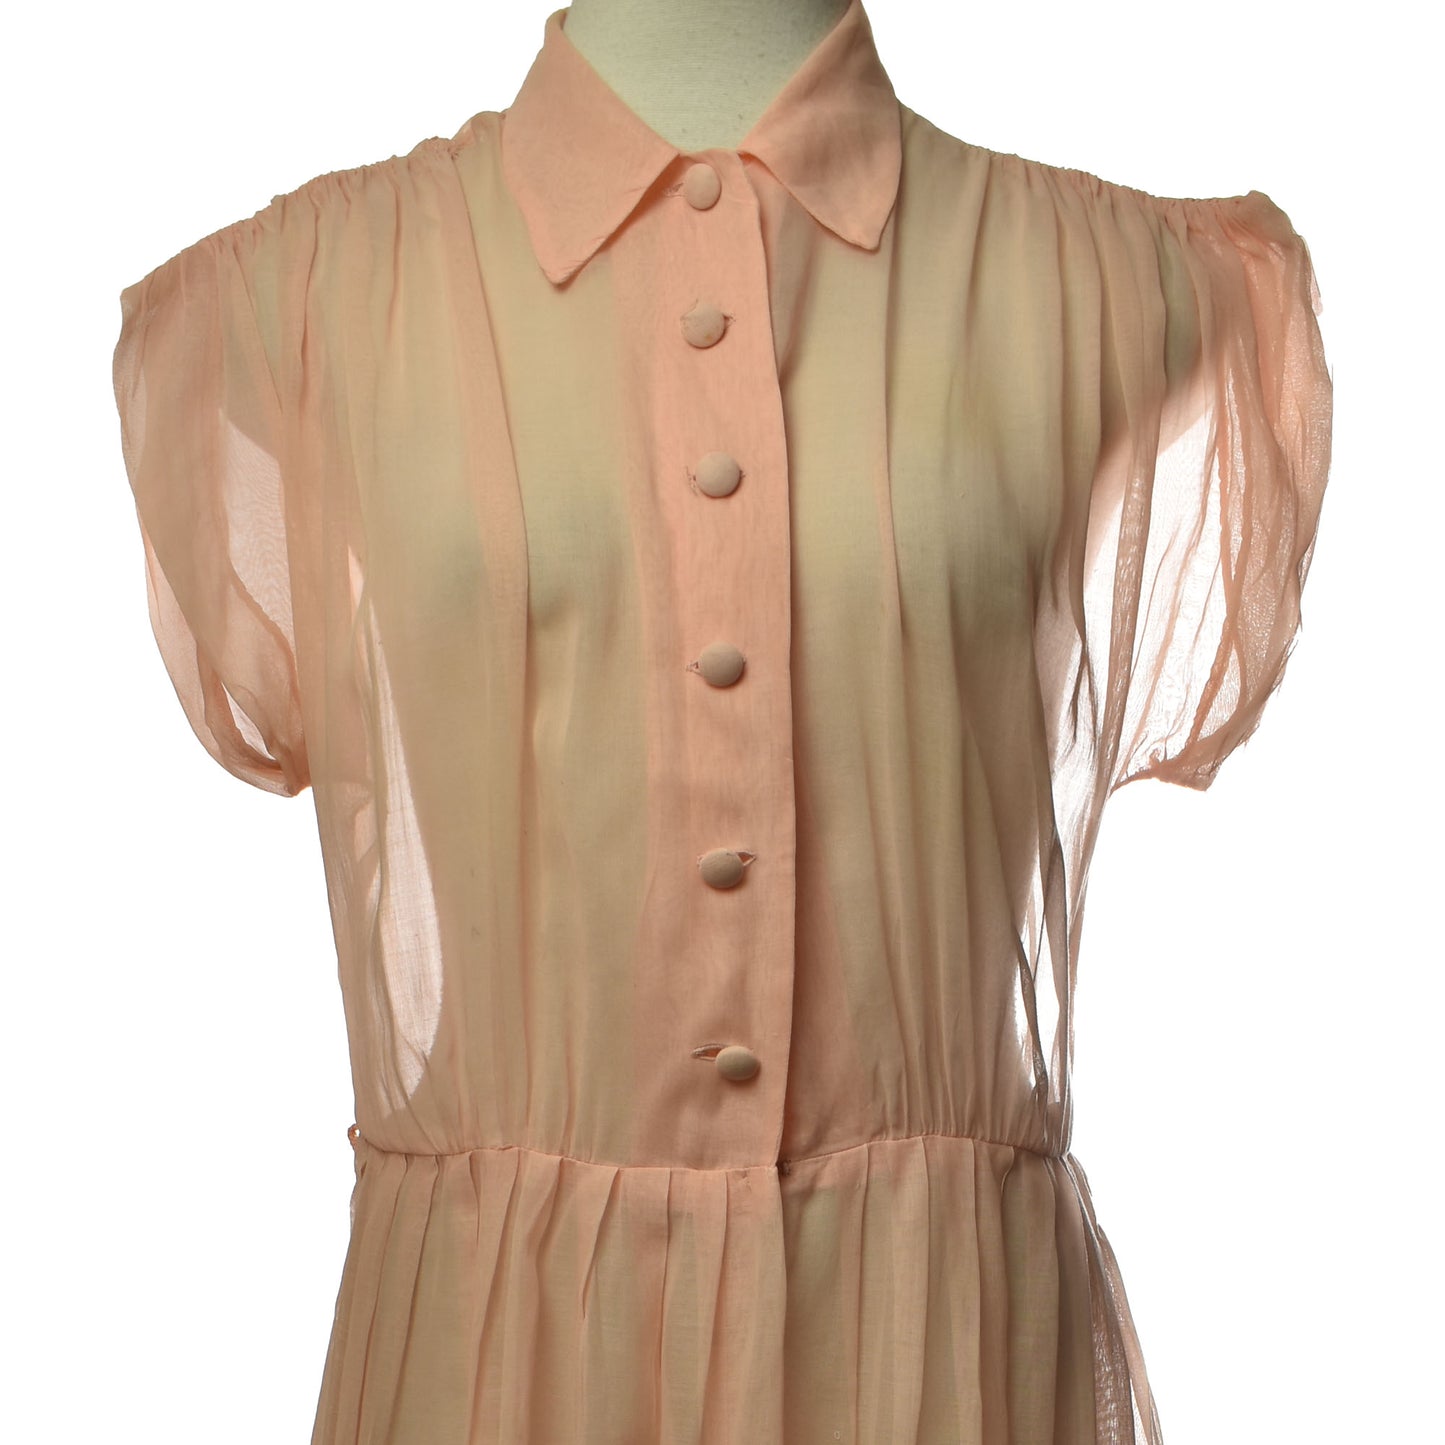 Vintage 50s Nelly Don Sheer Button Up Pleated Shirtwaist Dress